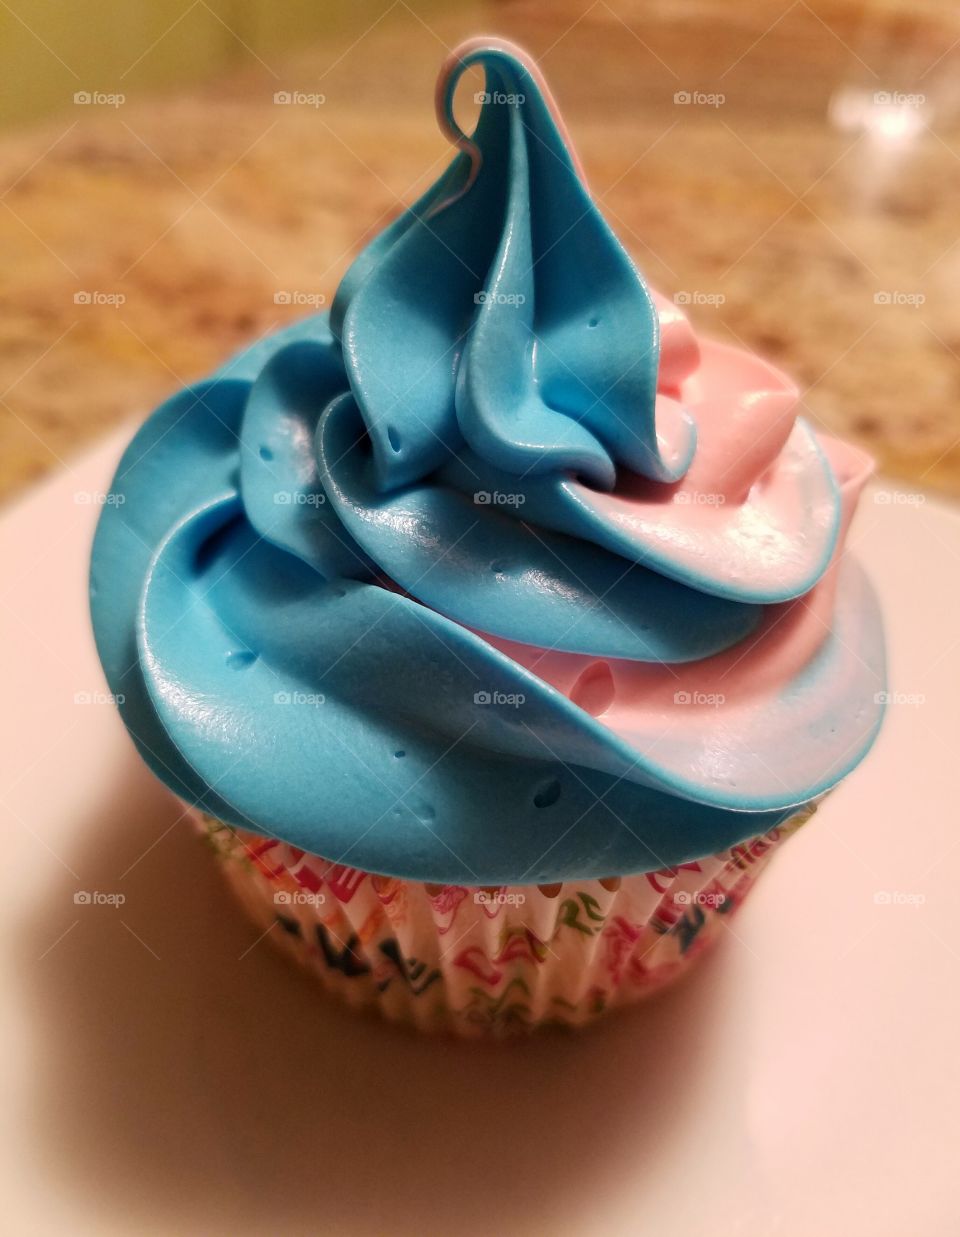 Colorful Cupcakes by Khila